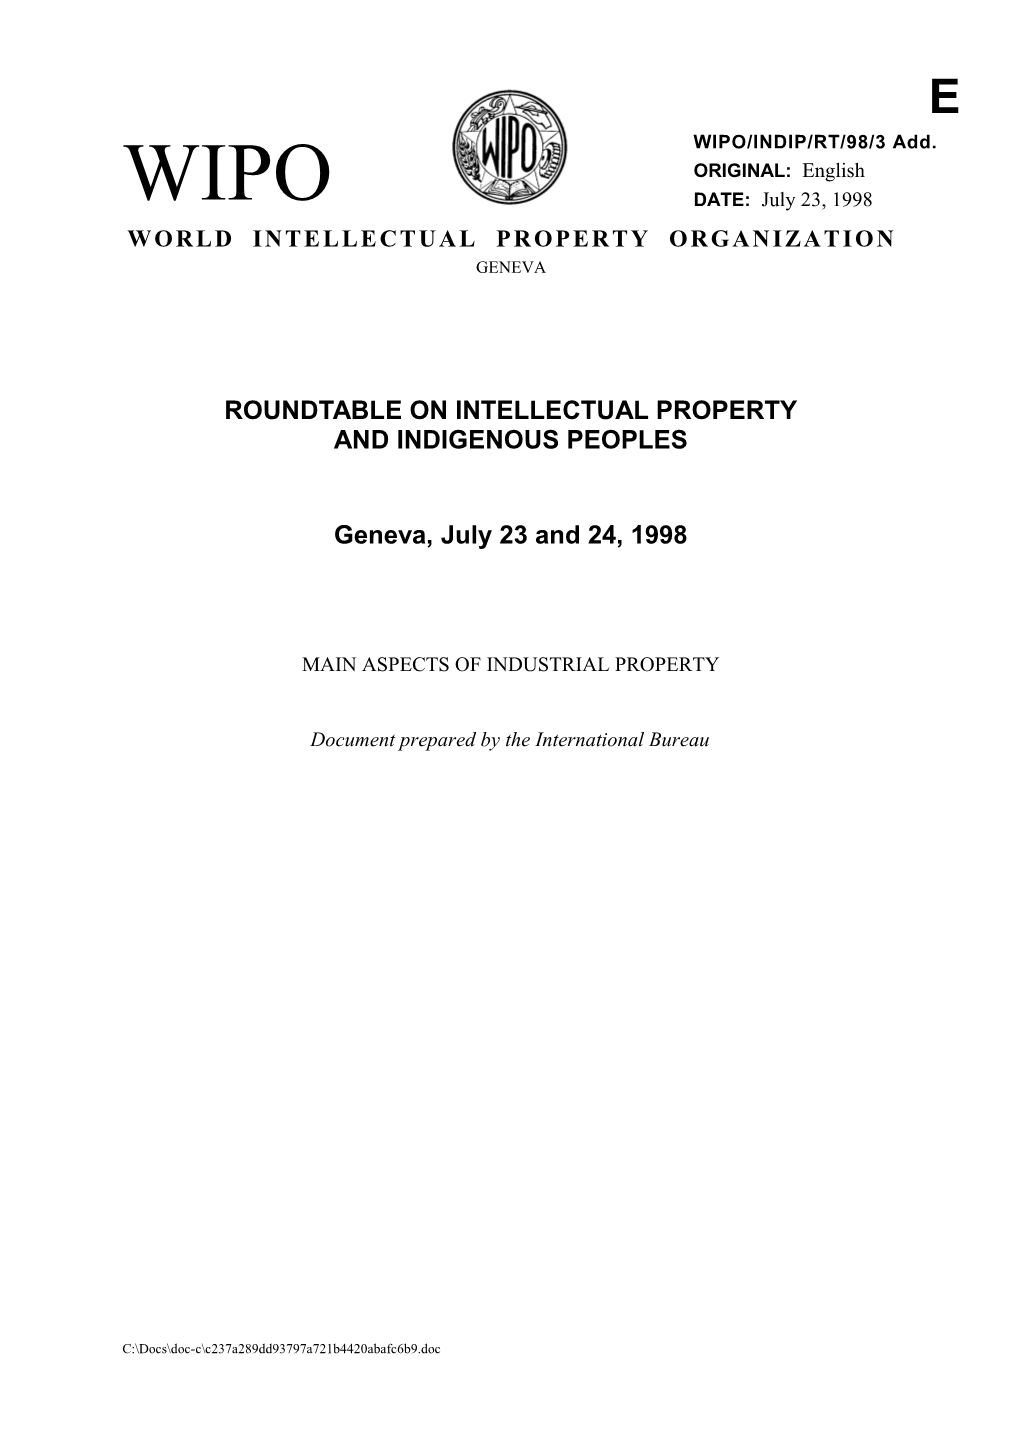 WIPO/INDIP/RT/98/3 ADD.: Main Aspects of Industrial Property (Annex 1)